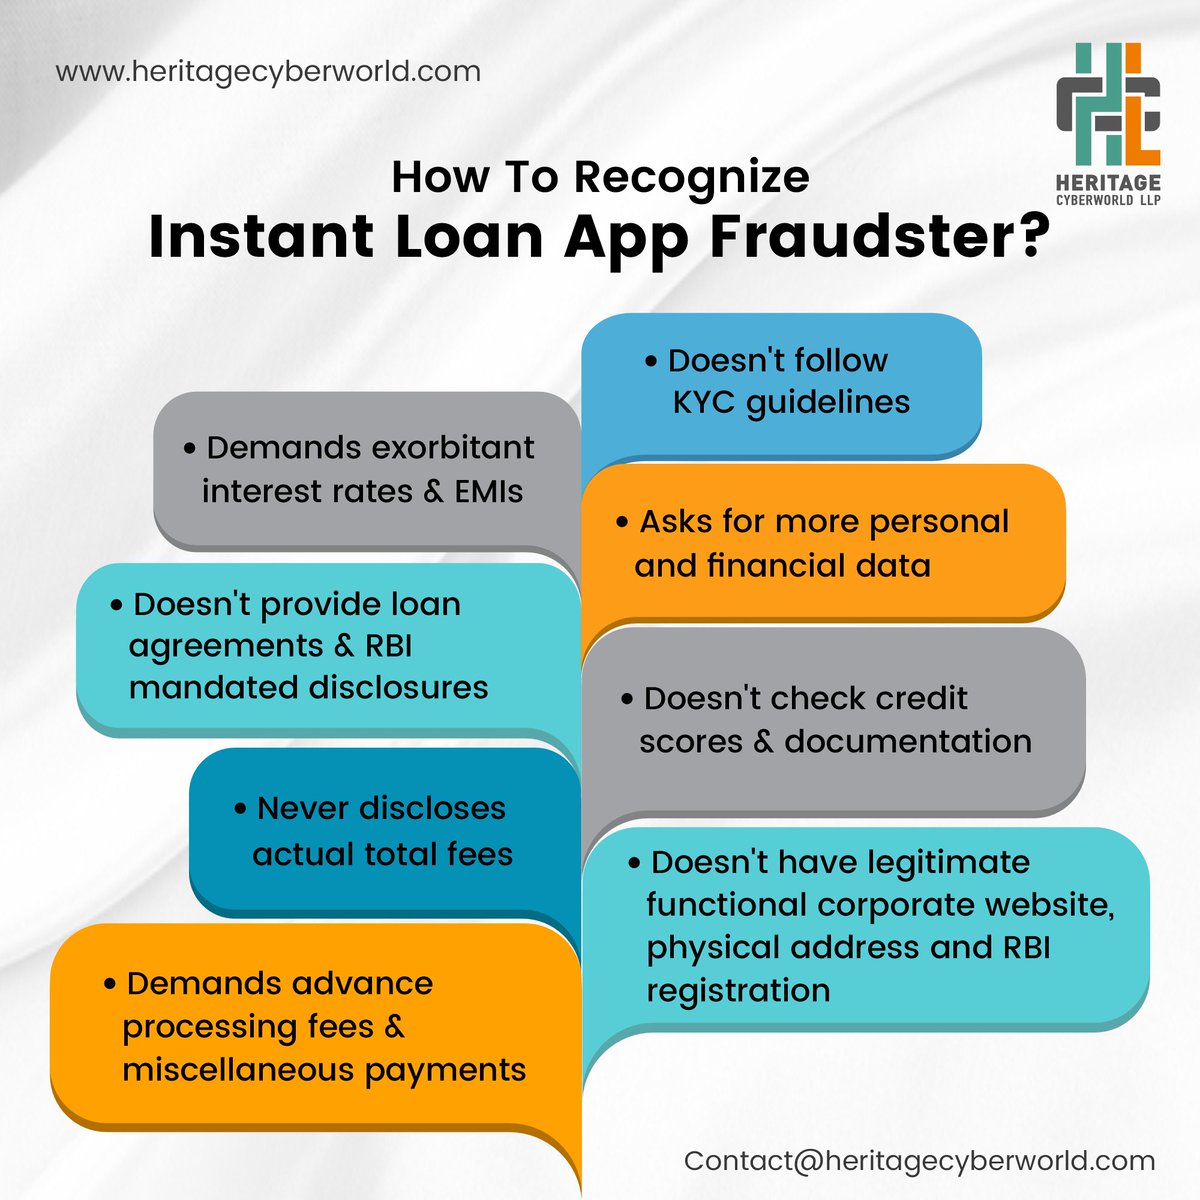 Check out these tips on how to spot an Instant Loan scammer and avoid falling into their trap.

#heritagecyberworld #cyberworld #Cyber #cybernews #fraudster #cybercrime #hacking #SeeYourselfIinCyber #ItsEasyToStaySafeOnline #BeCyberSmart